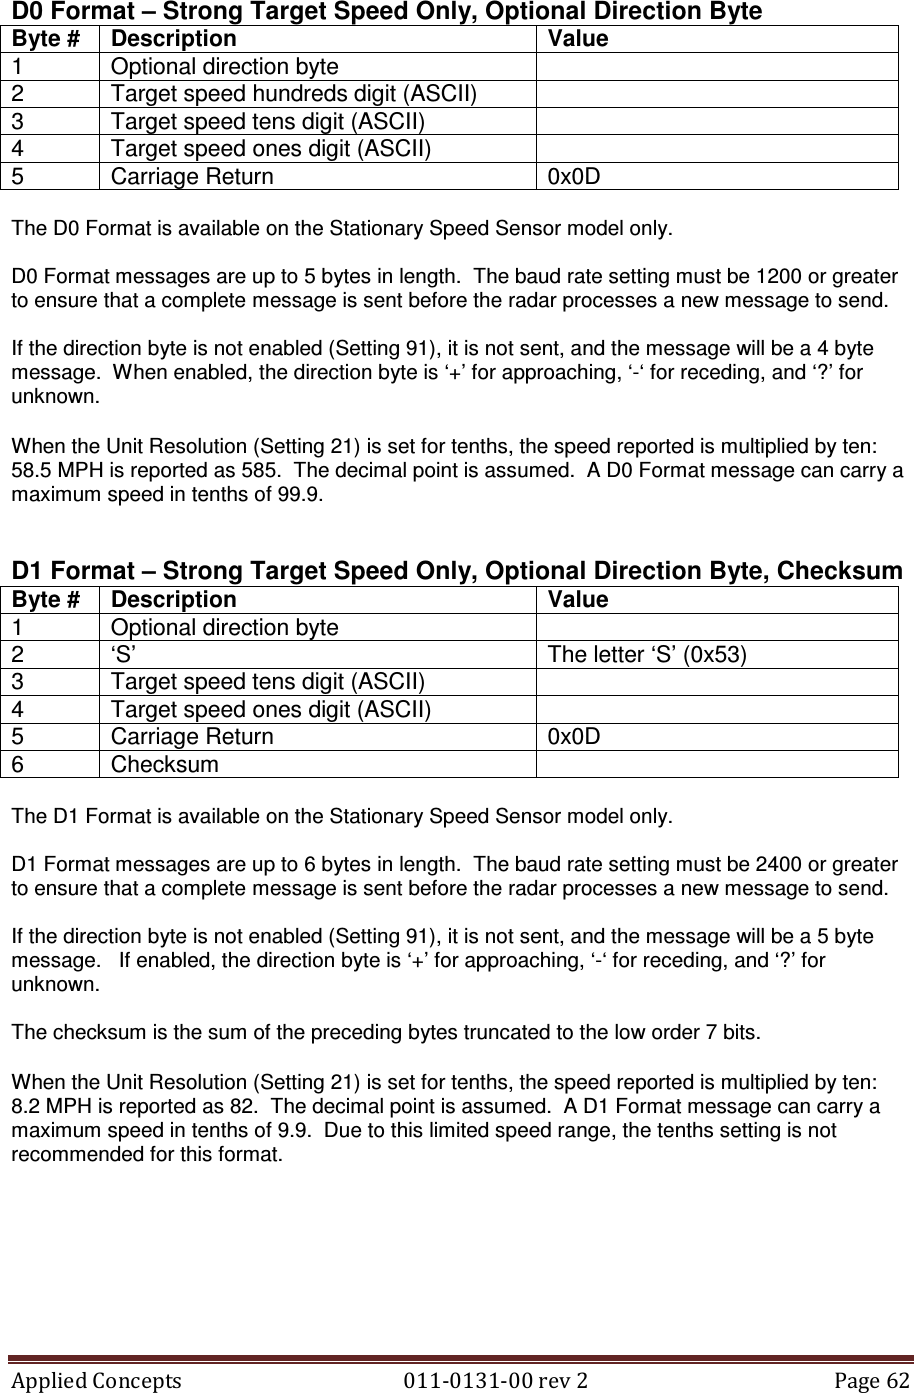 Applied Concepts                                            011-0131-00 rev 2  Page 62  D0 Format – Strong Target Speed Only, Optional Direction Byte Byte #  Description  Value 1  Optional direction byte   2  Target speed hundreds digit (ASCII)   3  Target speed tens digit (ASCII)   4  Target speed ones digit (ASCII)   5  Carriage Return  0x0D  The D0 Format is available on the Stationary Speed Sensor model only.  D0 Format messages are up to 5 bytes in length.  The baud rate setting must be 1200 or greater to ensure that a complete message is sent before the radar processes a new message to send.  If the direction byte is not enabled (Setting 91), it is not sent, and the message will be a 4 byte message.  When enabled, the direction byte is ‘+’ for approaching, ‘-‘ for receding, and ‘?’ for unknown.  When the Unit Resolution (Setting 21) is set for tenths, the speed reported is multiplied by ten: 58.5 MPH is reported as 585.  The decimal point is assumed.  A D0 Format message can carry a maximum speed in tenths of 99.9.   D1 Format – Strong Target Speed Only, Optional Direction Byte, Checksum Byte #  Description  Value 1  Optional direction byte   2  ‘S’  The letter ‘S’ (0x53) 3  Target speed tens digit (ASCII)   4  Target speed ones digit (ASCII)   5  Carriage Return  0x0D 6  Checksum    The D1 Format is available on the Stationary Speed Sensor model only.  D1 Format messages are up to 6 bytes in length.  The baud rate setting must be 2400 or greater to ensure that a complete message is sent before the radar processes a new message to send.  If the direction byte is not enabled (Setting 91), it is not sent, and the message will be a 5 byte message.   If enabled, the direction byte is ‘+’ for approaching, ‘-‘ for receding, and ‘?’ for unknown.  The checksum is the sum of the preceding bytes truncated to the low order 7 bits.  When the Unit Resolution (Setting 21) is set for tenths, the speed reported is multiplied by ten: 8.2 MPH is reported as 82.  The decimal point is assumed.  A D1 Format message can carry a maximum speed in tenths of 9.9.  Due to this limited speed range, the tenths setting is not recommended for this format.   